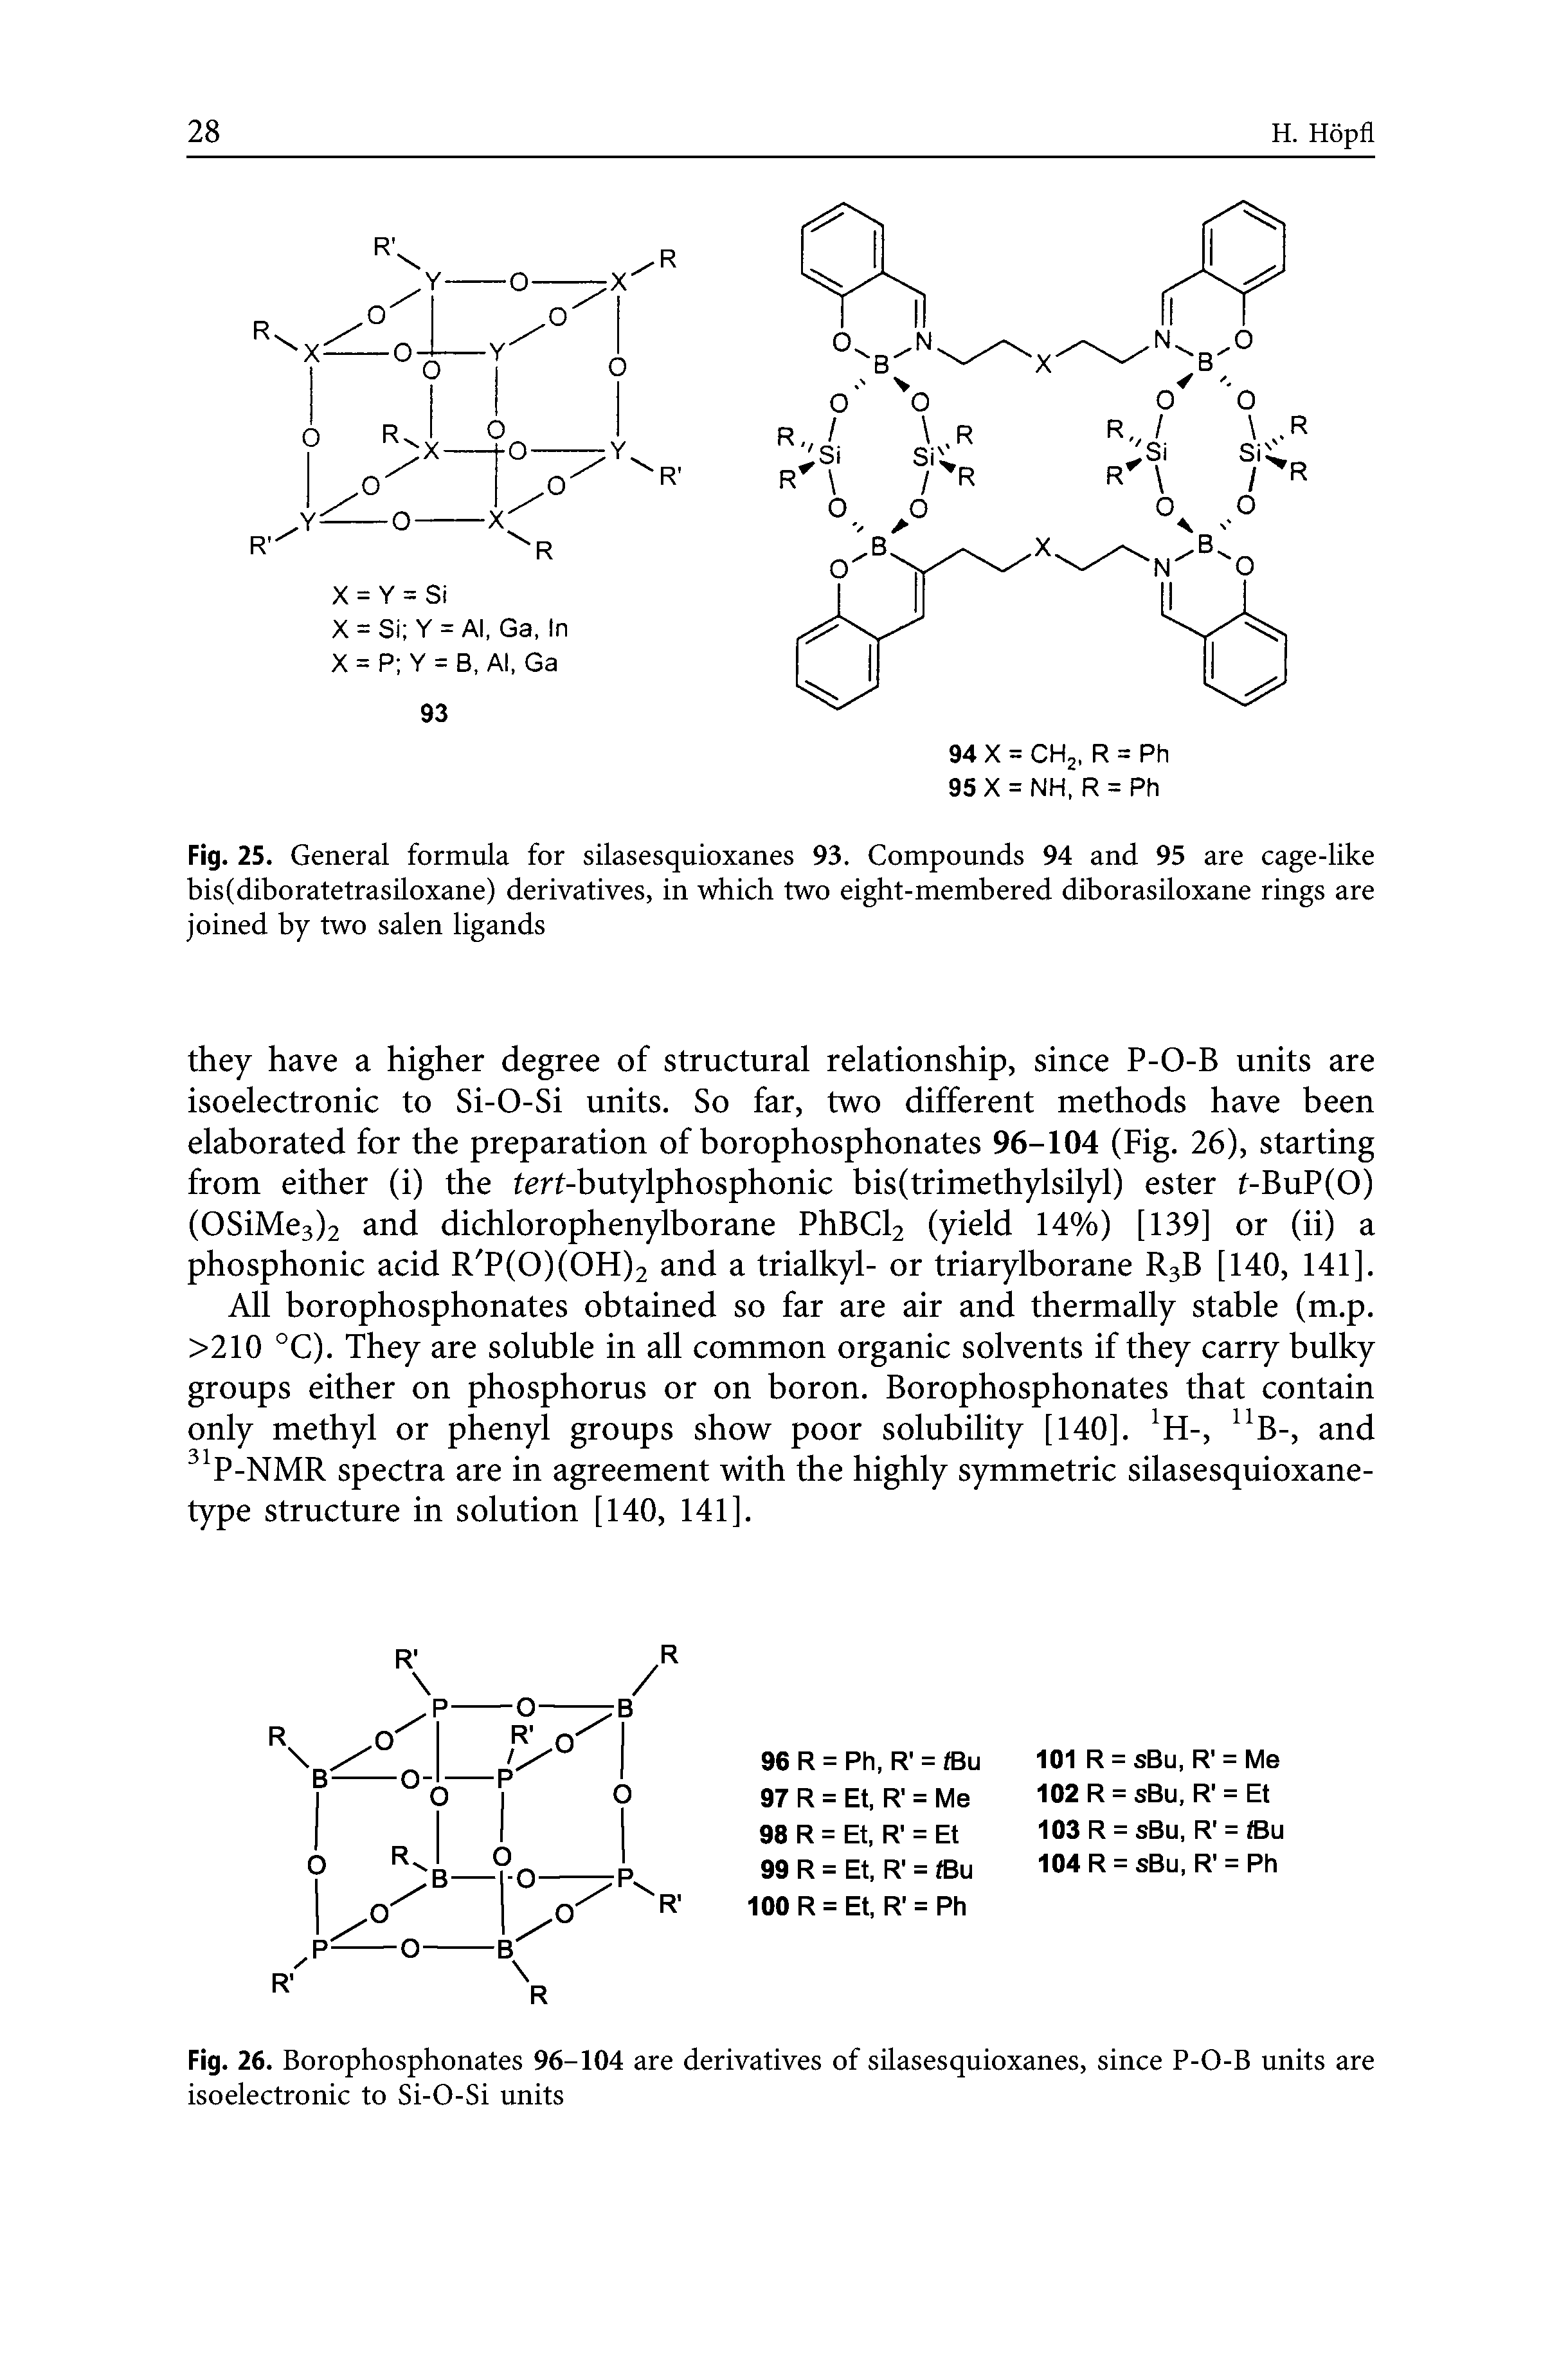 Fig. 25. General formula for silasesquioxanes 93. Compounds 94 and 95 are cage-like bis(diboratetrasiloxane) derivatives, in which two eight-membered diborasiloxane rings are joined by two salen ligands...